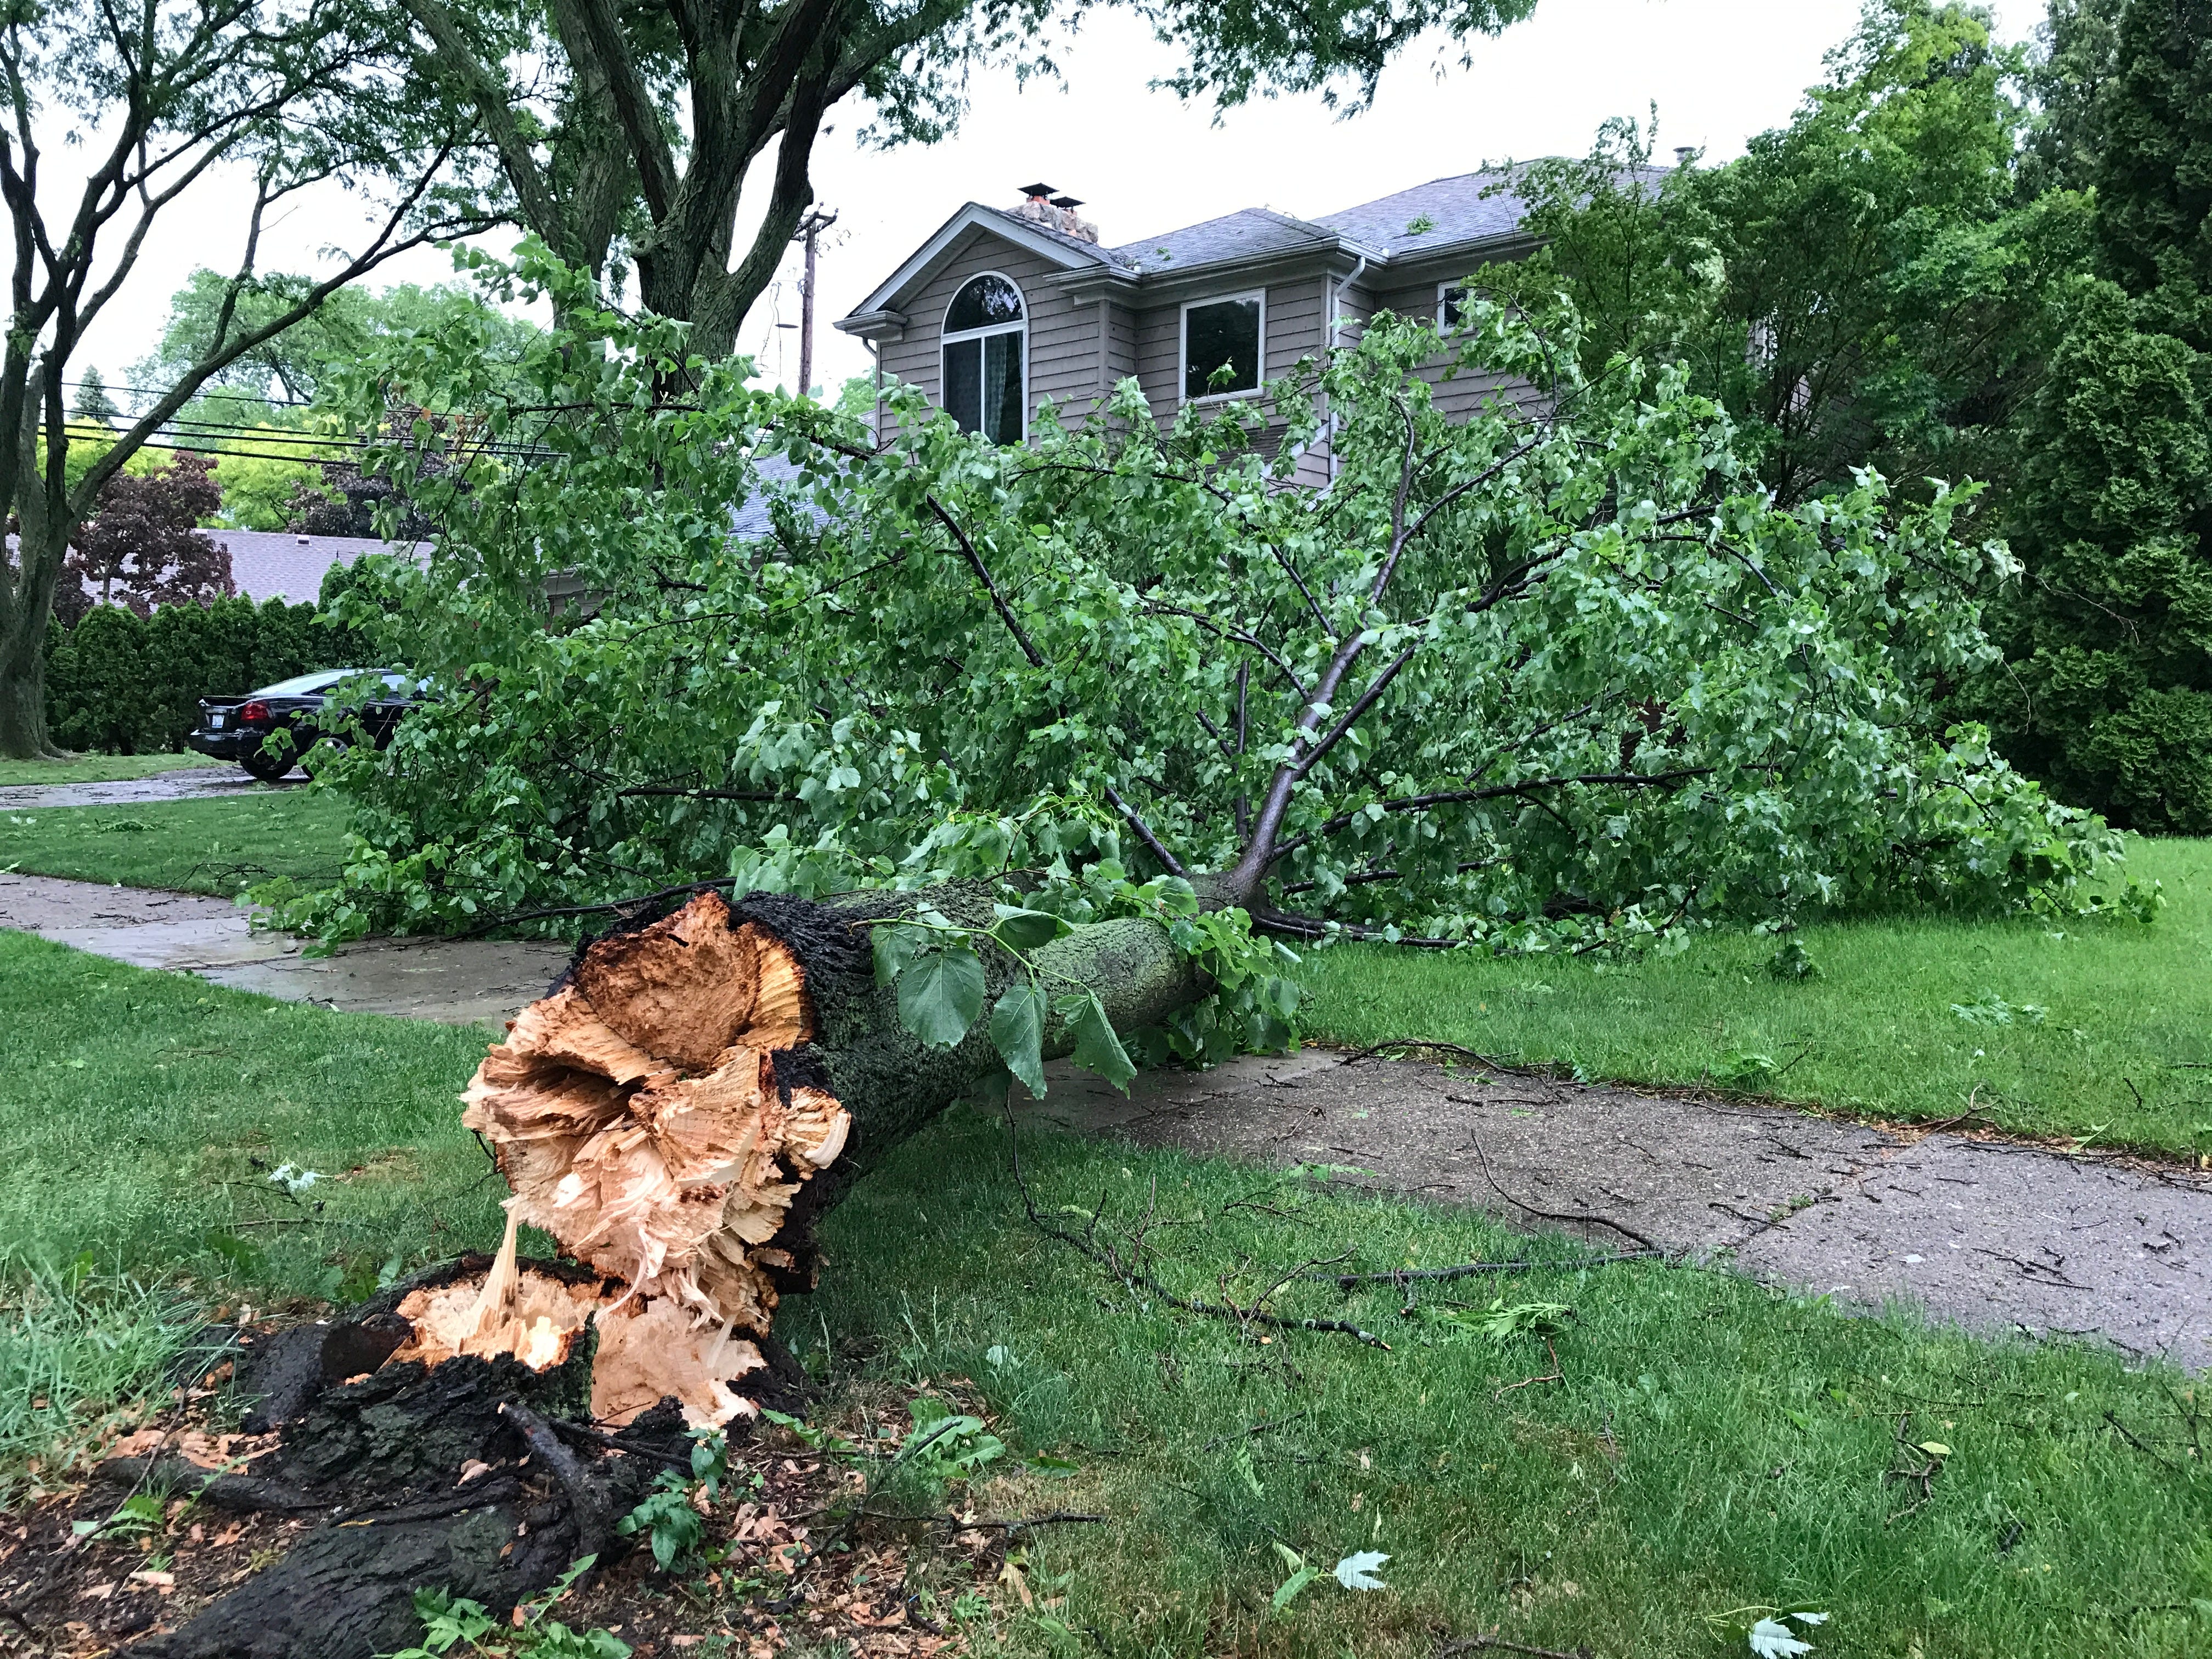 High winds brought down this tree along Holiday Road in Grosse Pointe Woods.